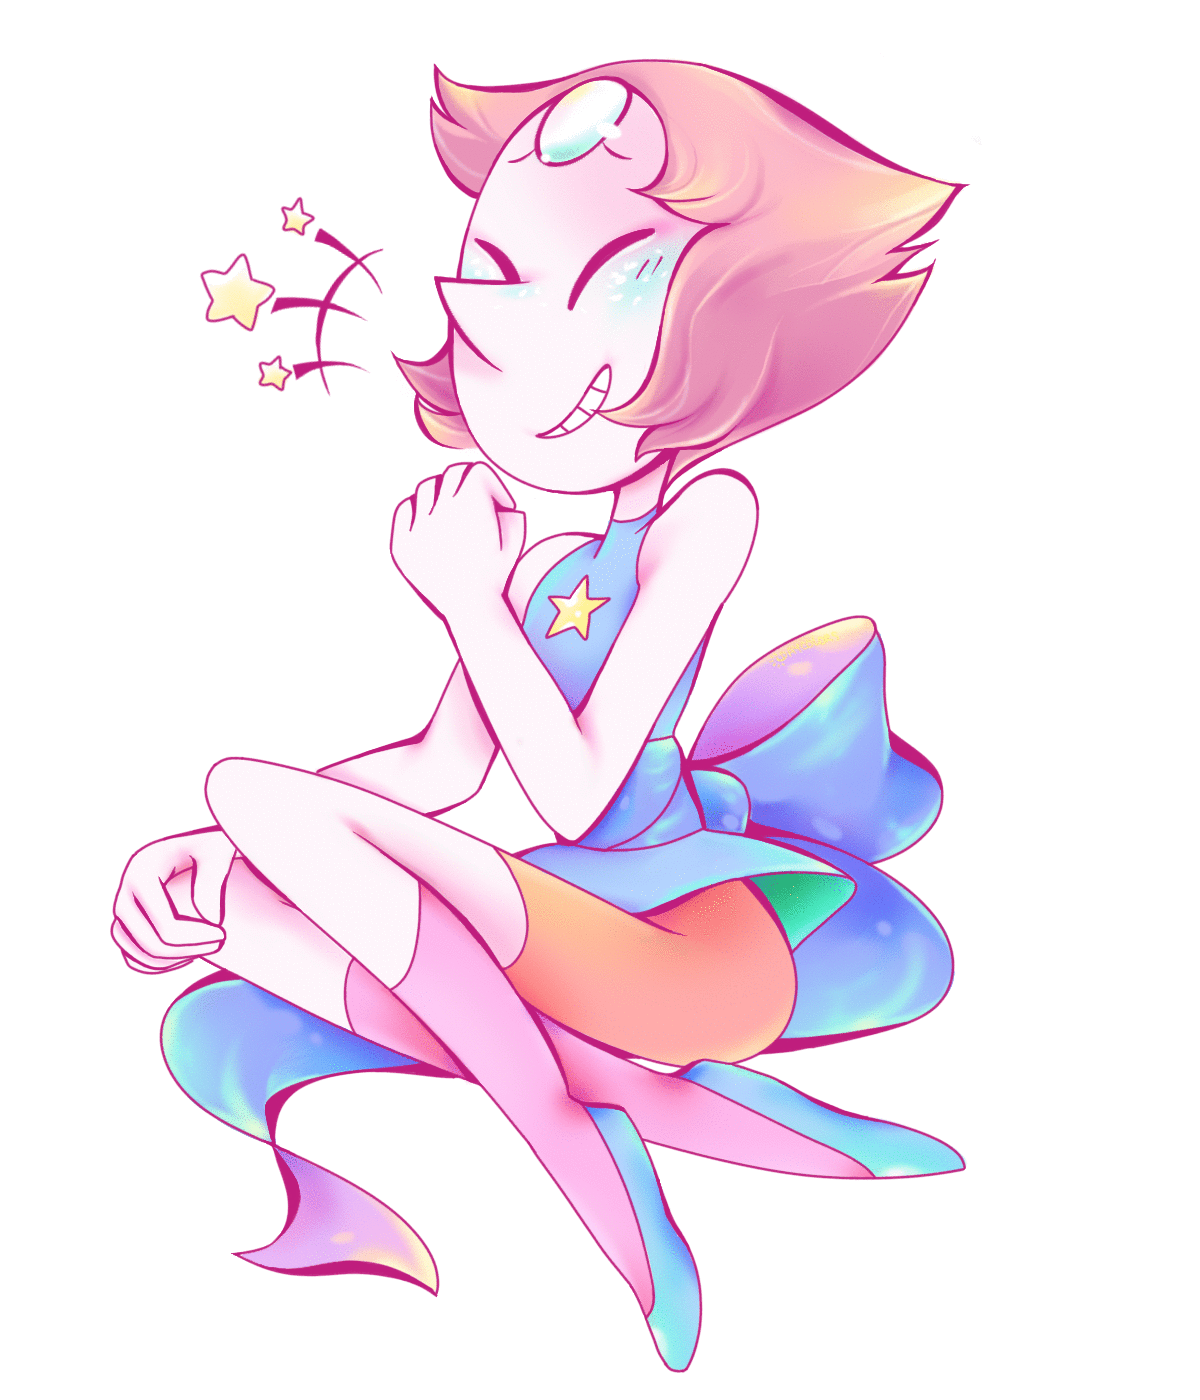 Still working with my tablet brushes but I really like making gifs with it, please accept this pearl, who is also transparent!!